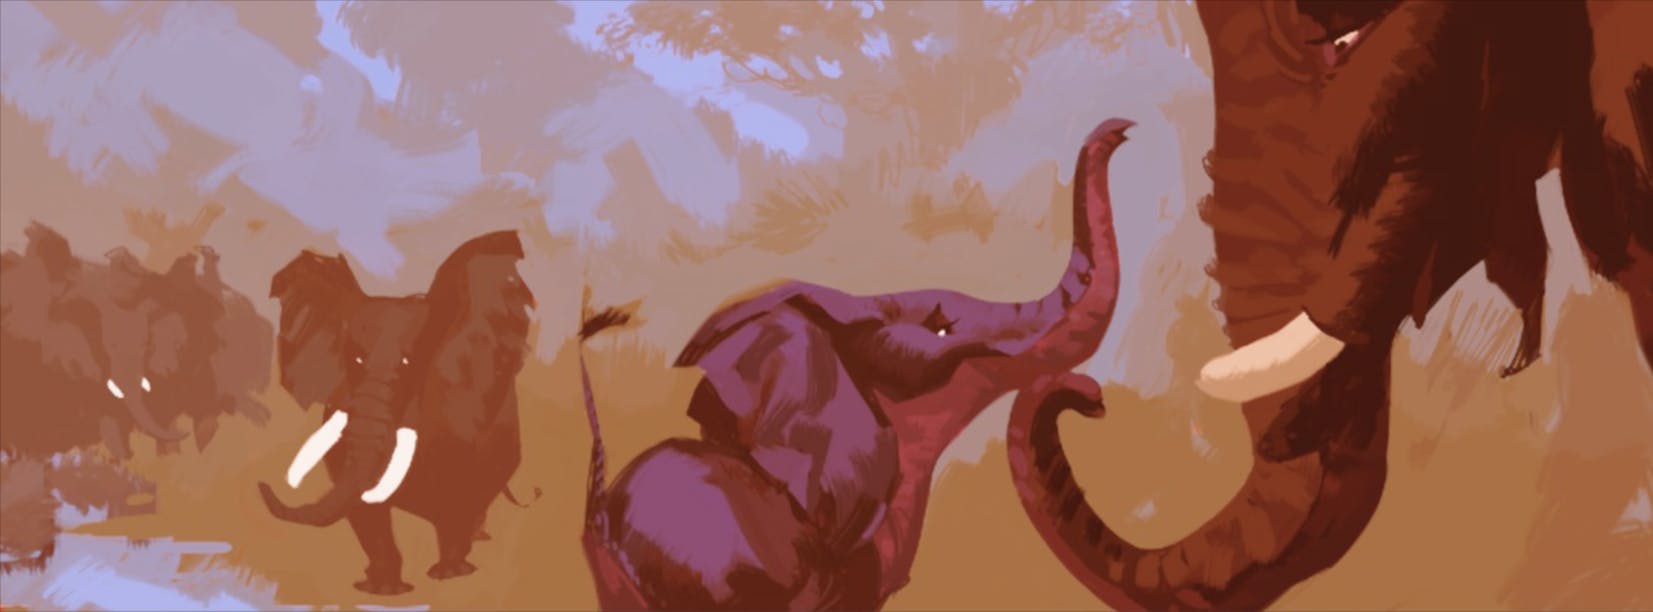 Concept art of a baby elephant